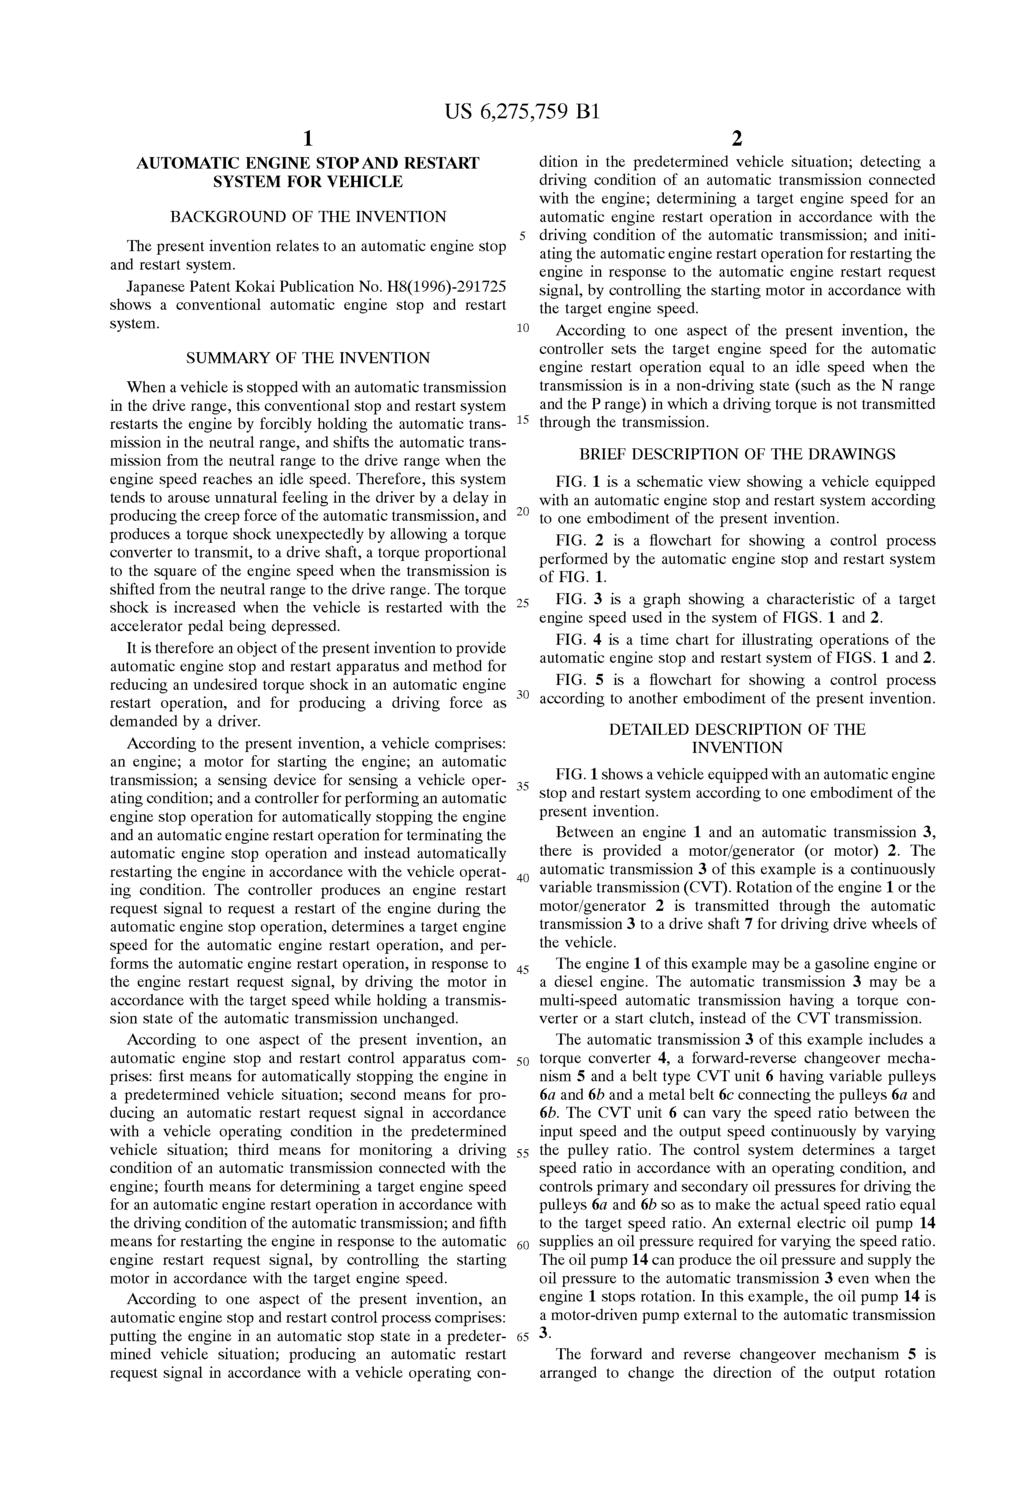 1 AUTOMATIC ENGINE STOP AND RESTART SYSTEM FOR WEHICLE BACKGROUND OF THE INVENTION The present invention relates to an automatic engine Stop and restart System. Japanese Patent Kokai Publication No.